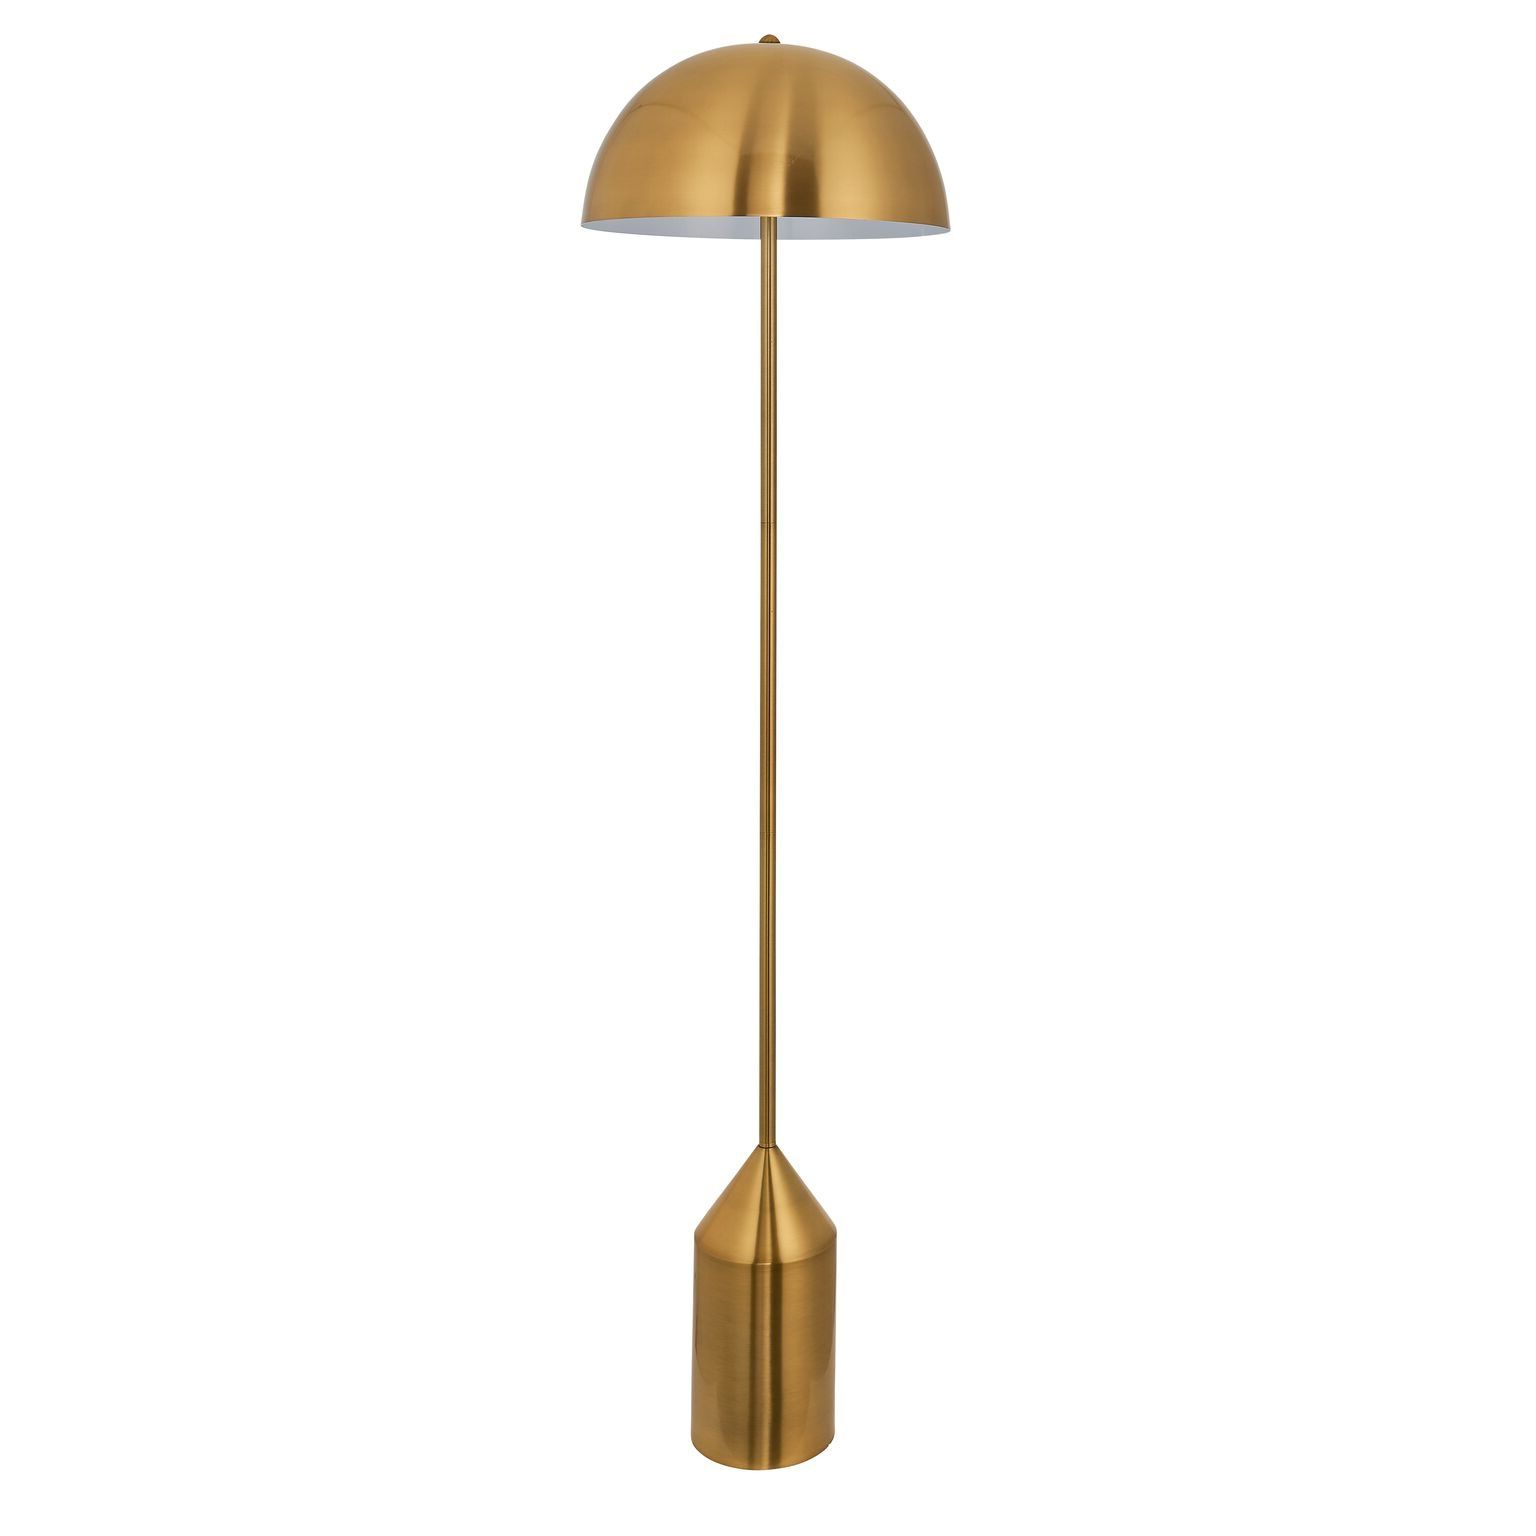 Brass Standing Lamps Pertaining To Current Mid Century Brass Dome Floor Lamp – Lightbox (View 11 of 15)